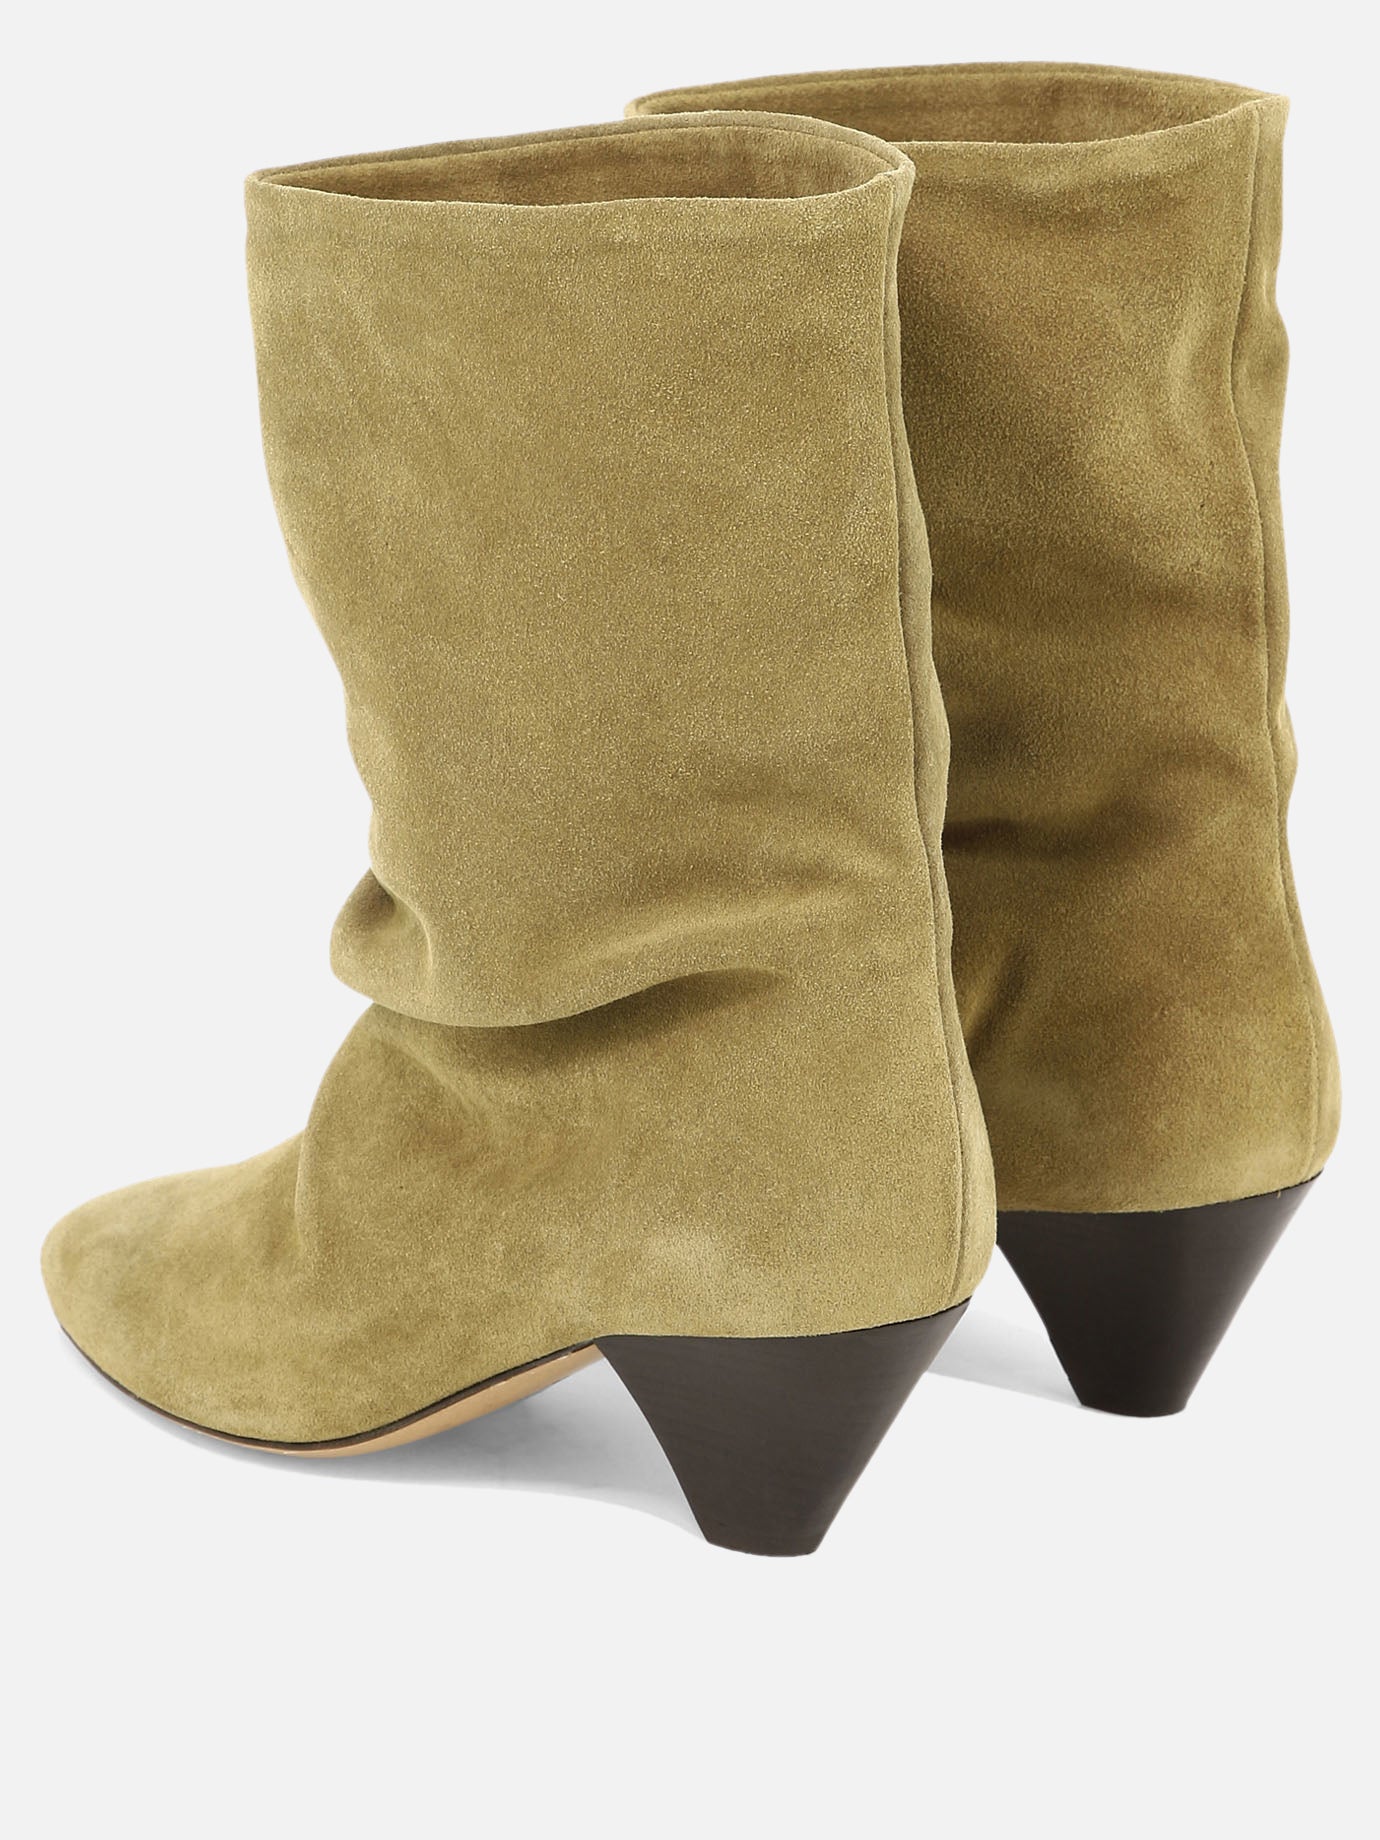 "Reachi" ankle boots